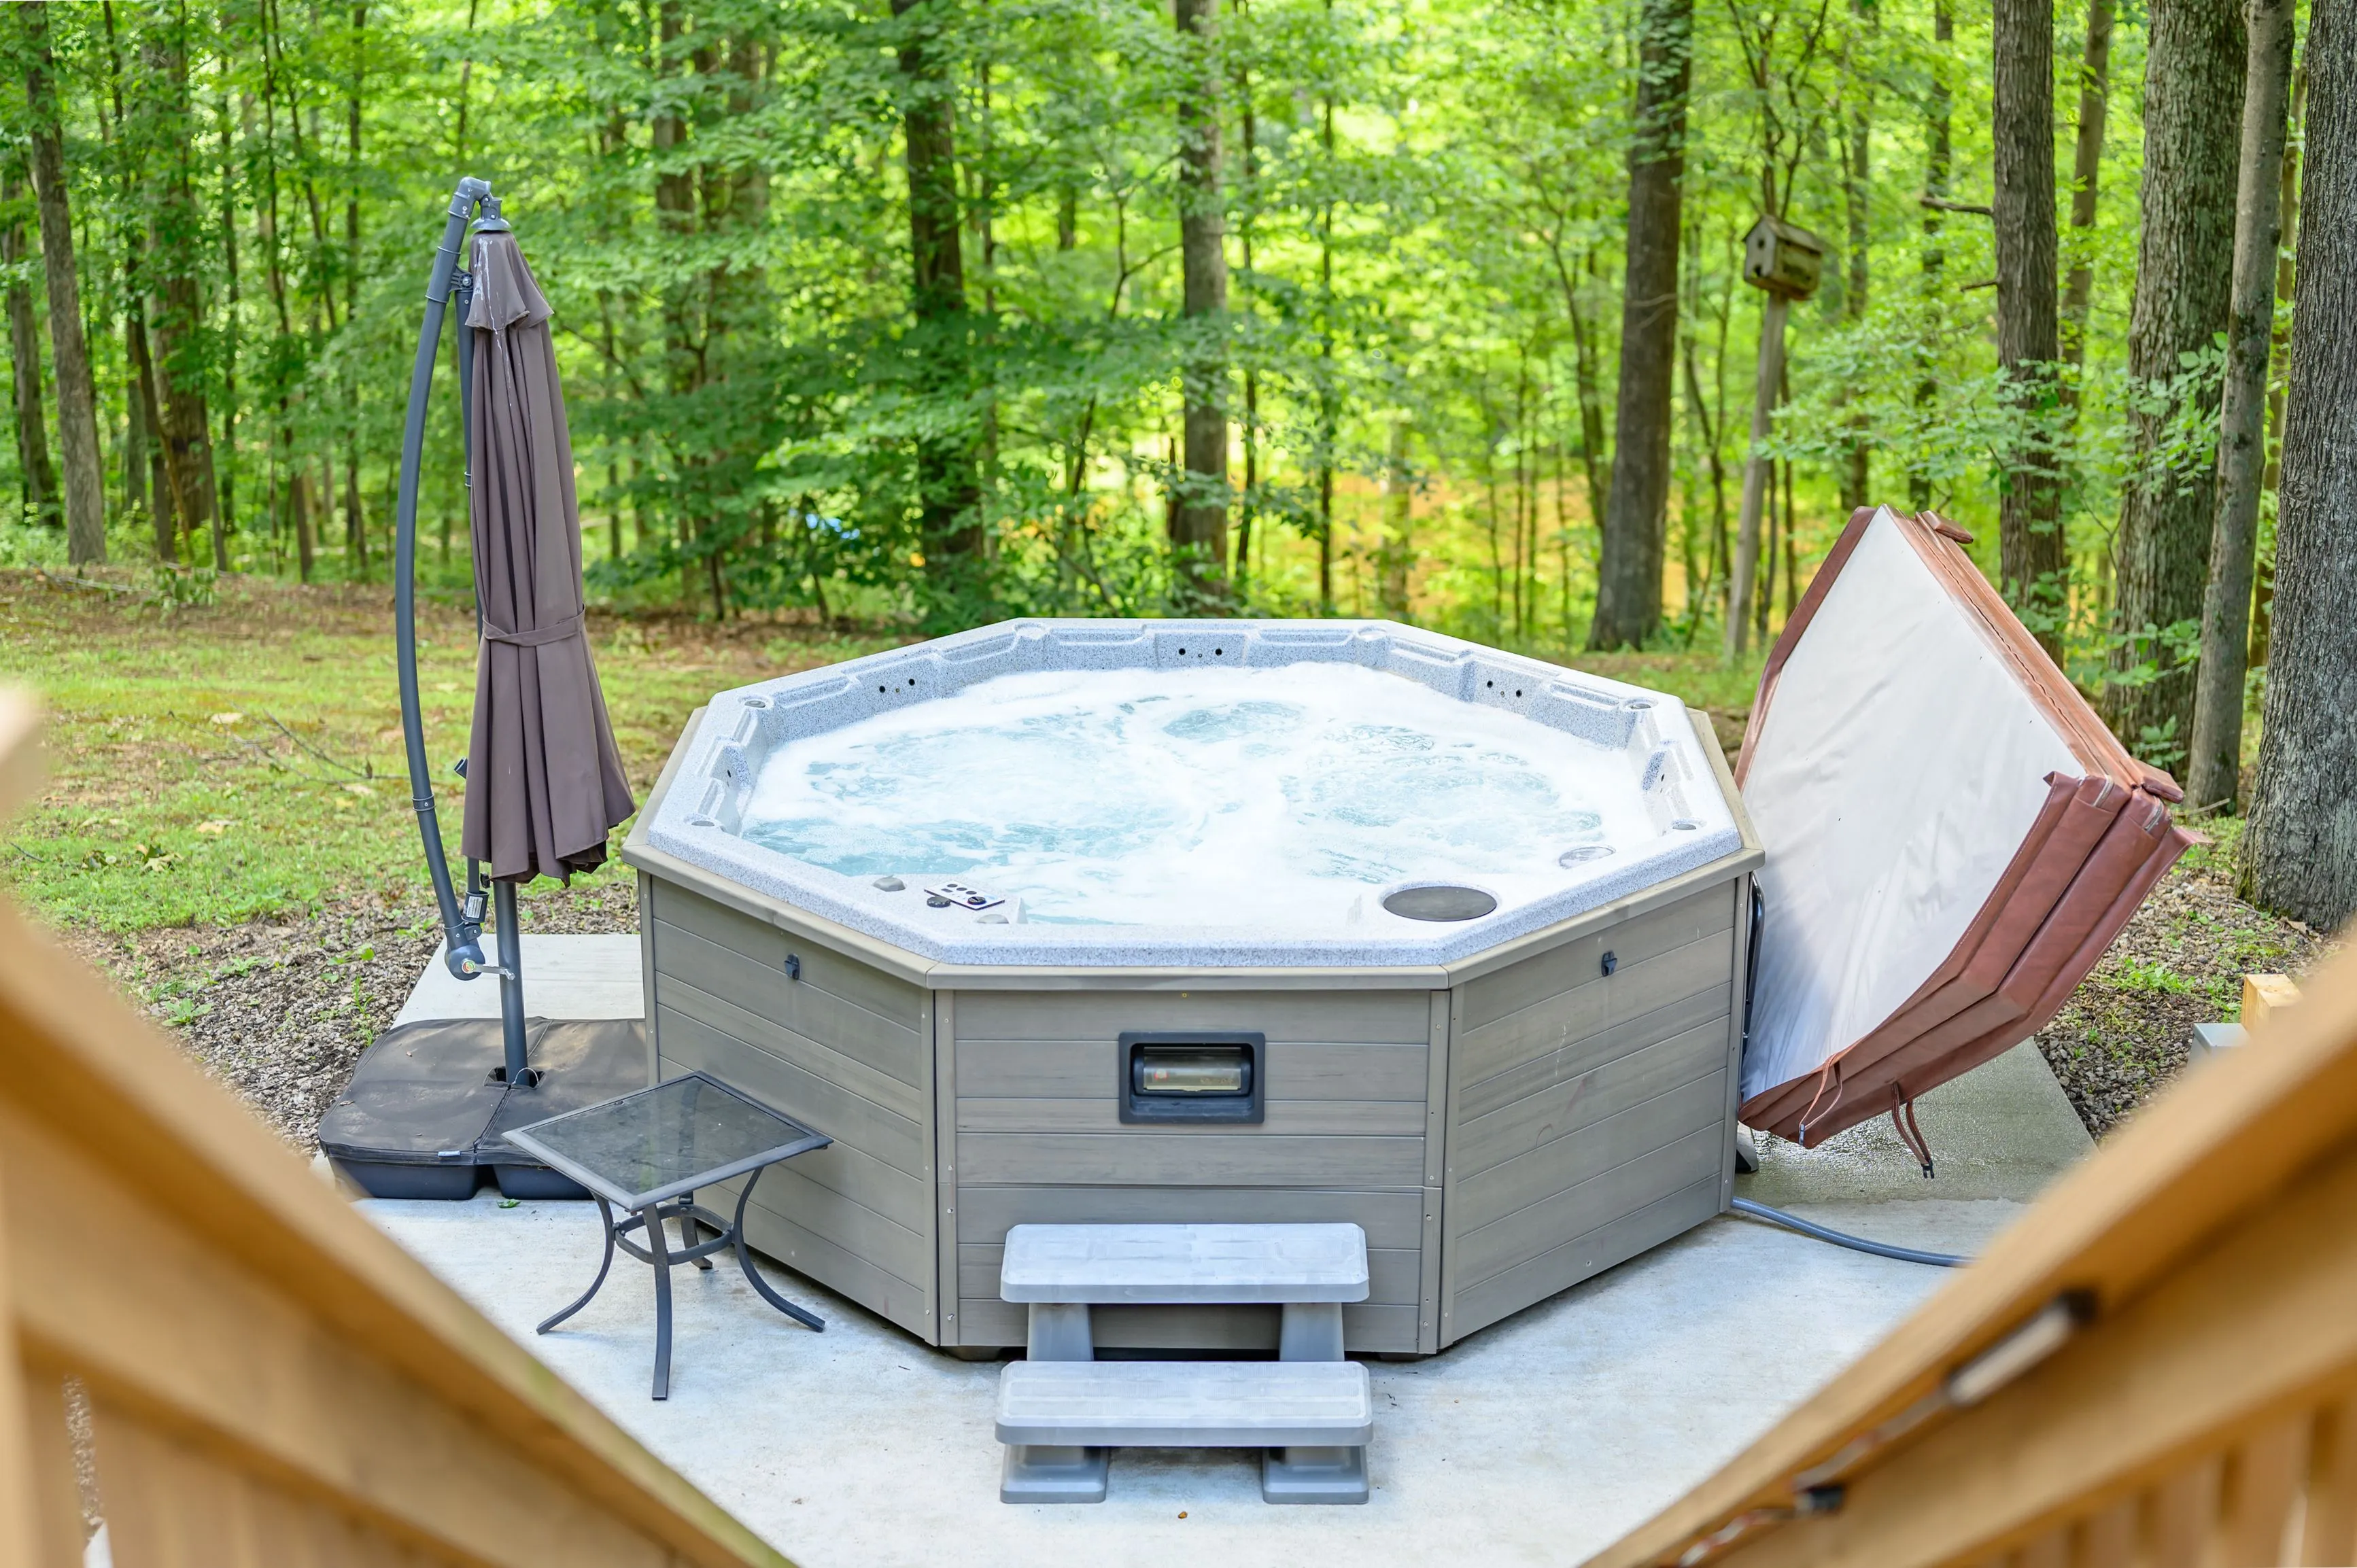 An outdoor hot tub with bubbling water on a patio surrounded by trees, with a folded lounge chair and a closed patio umbrella nearby.